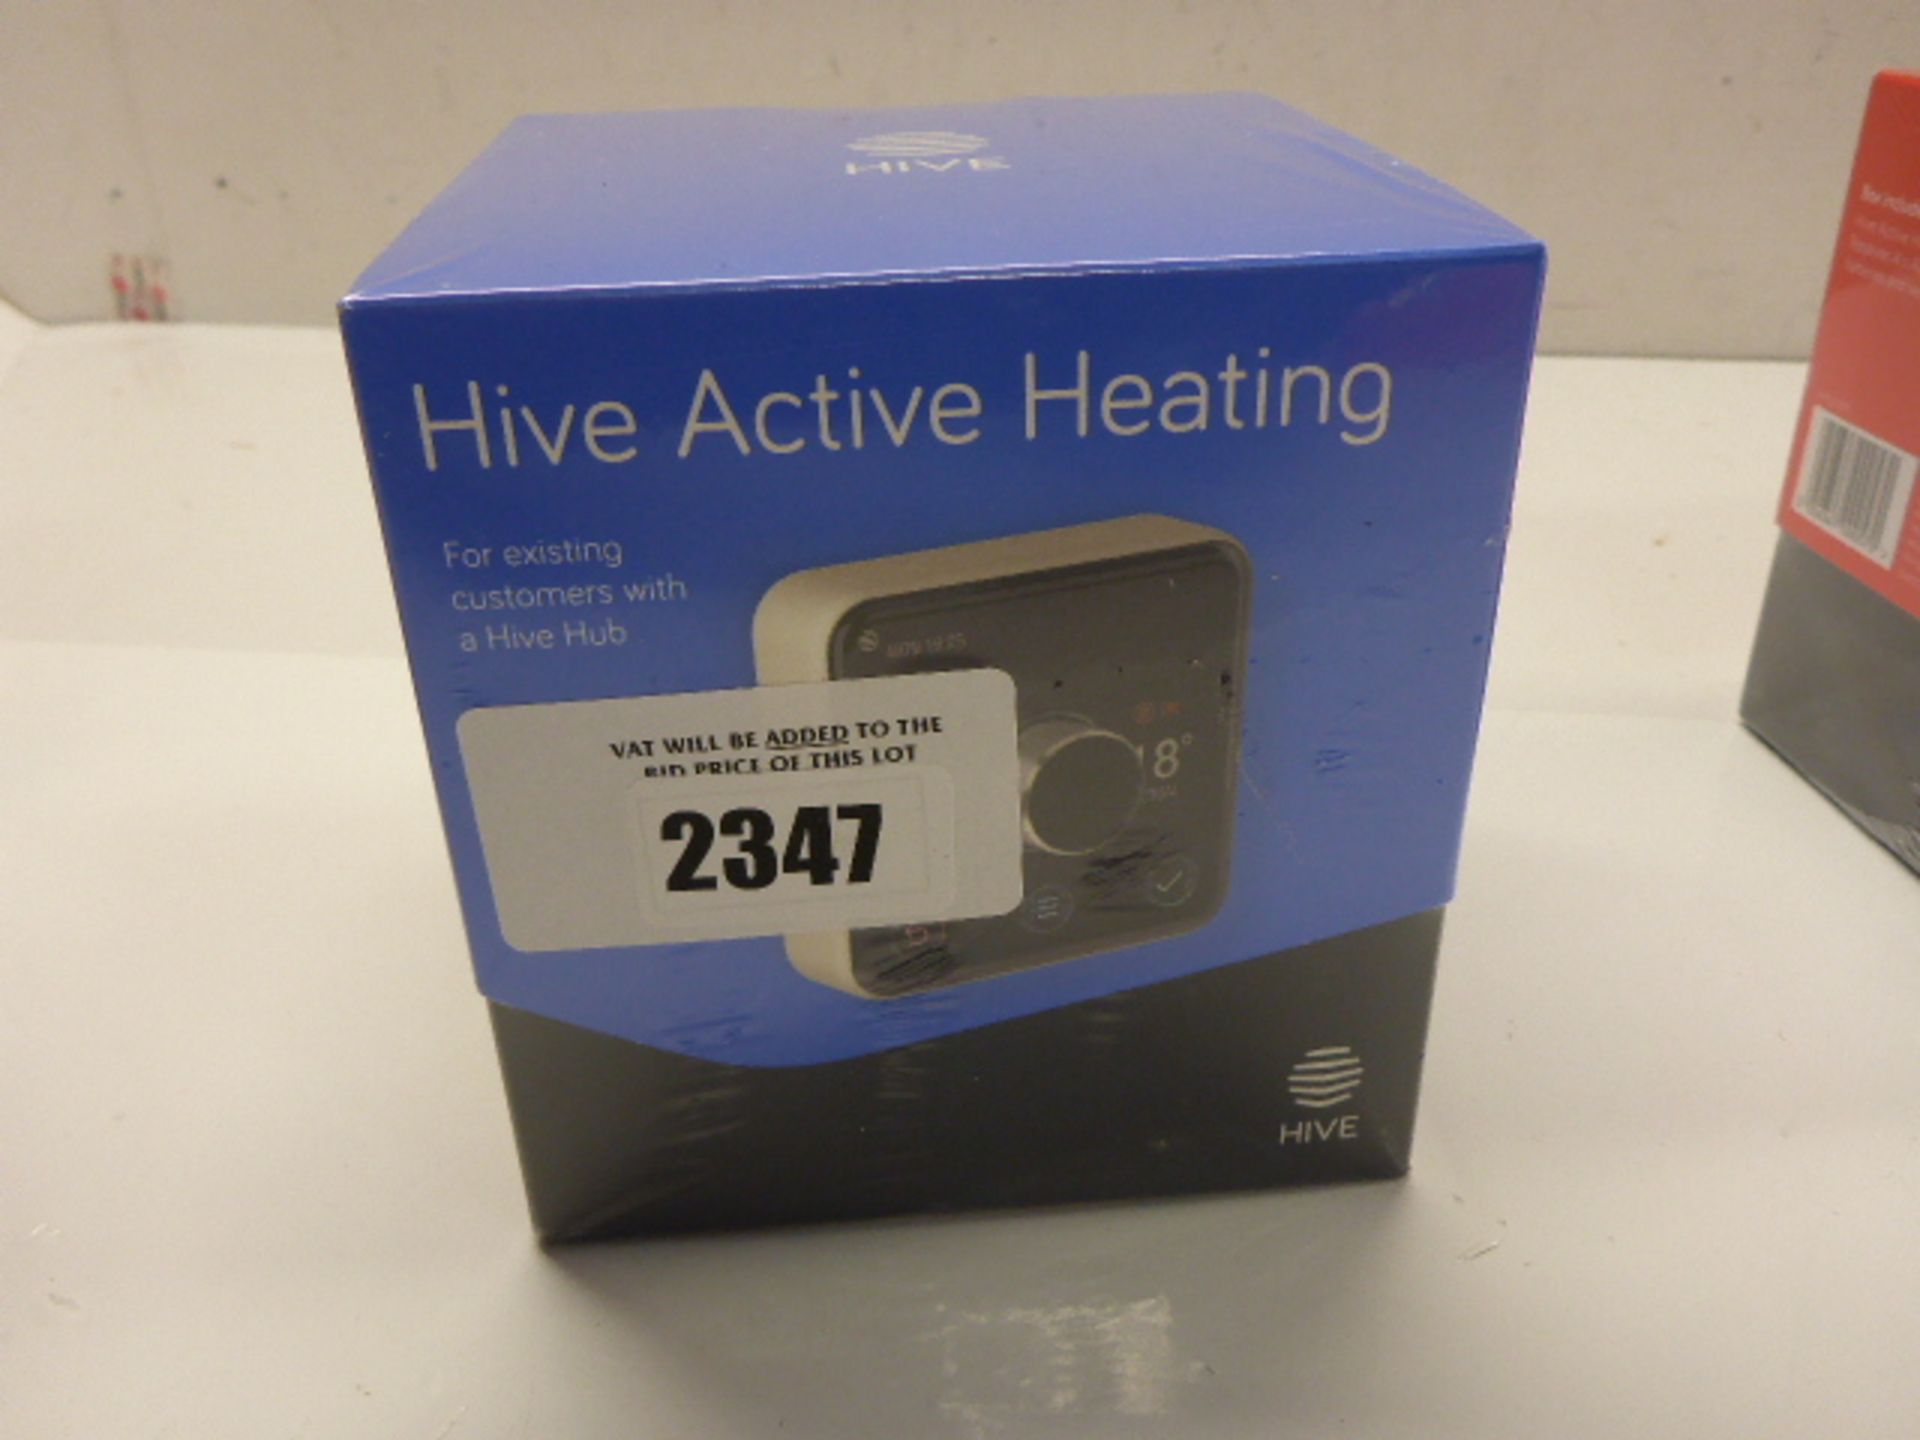 Hive active heating control module sealed in box.